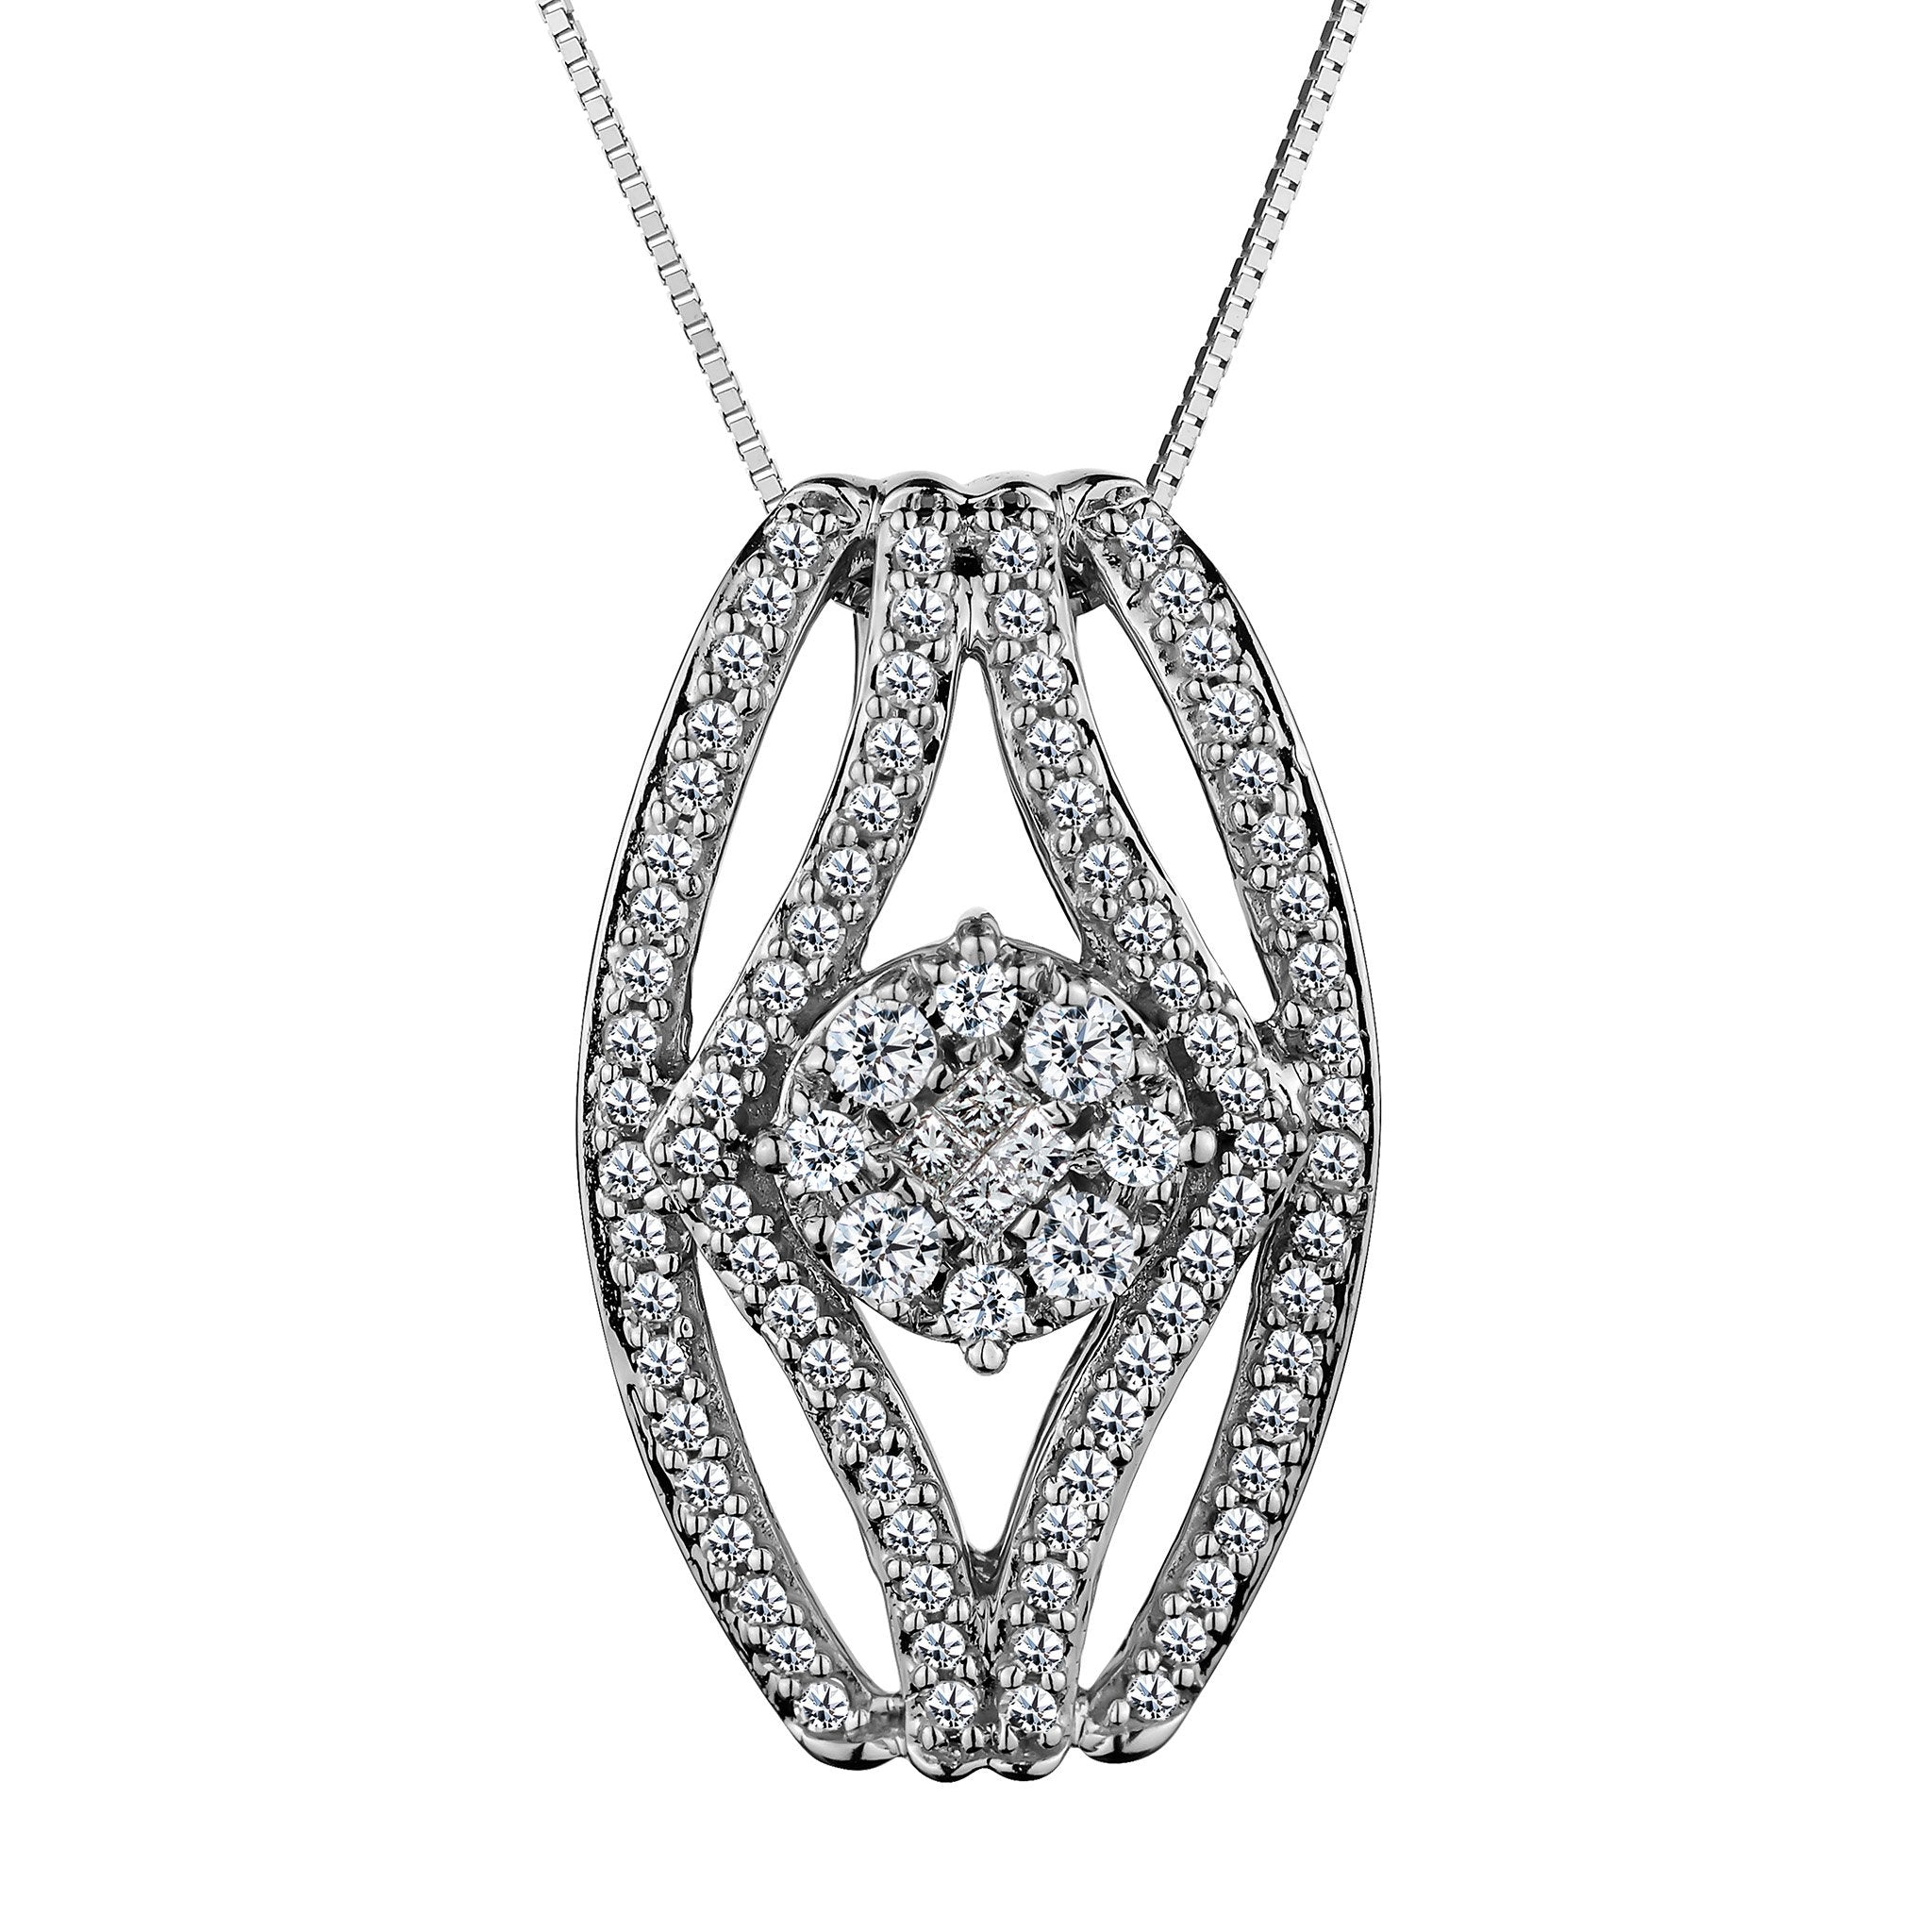 .50 carat Diamond Pendant, 10kt White Gold, With 10kt White Gold Chain.....................Now